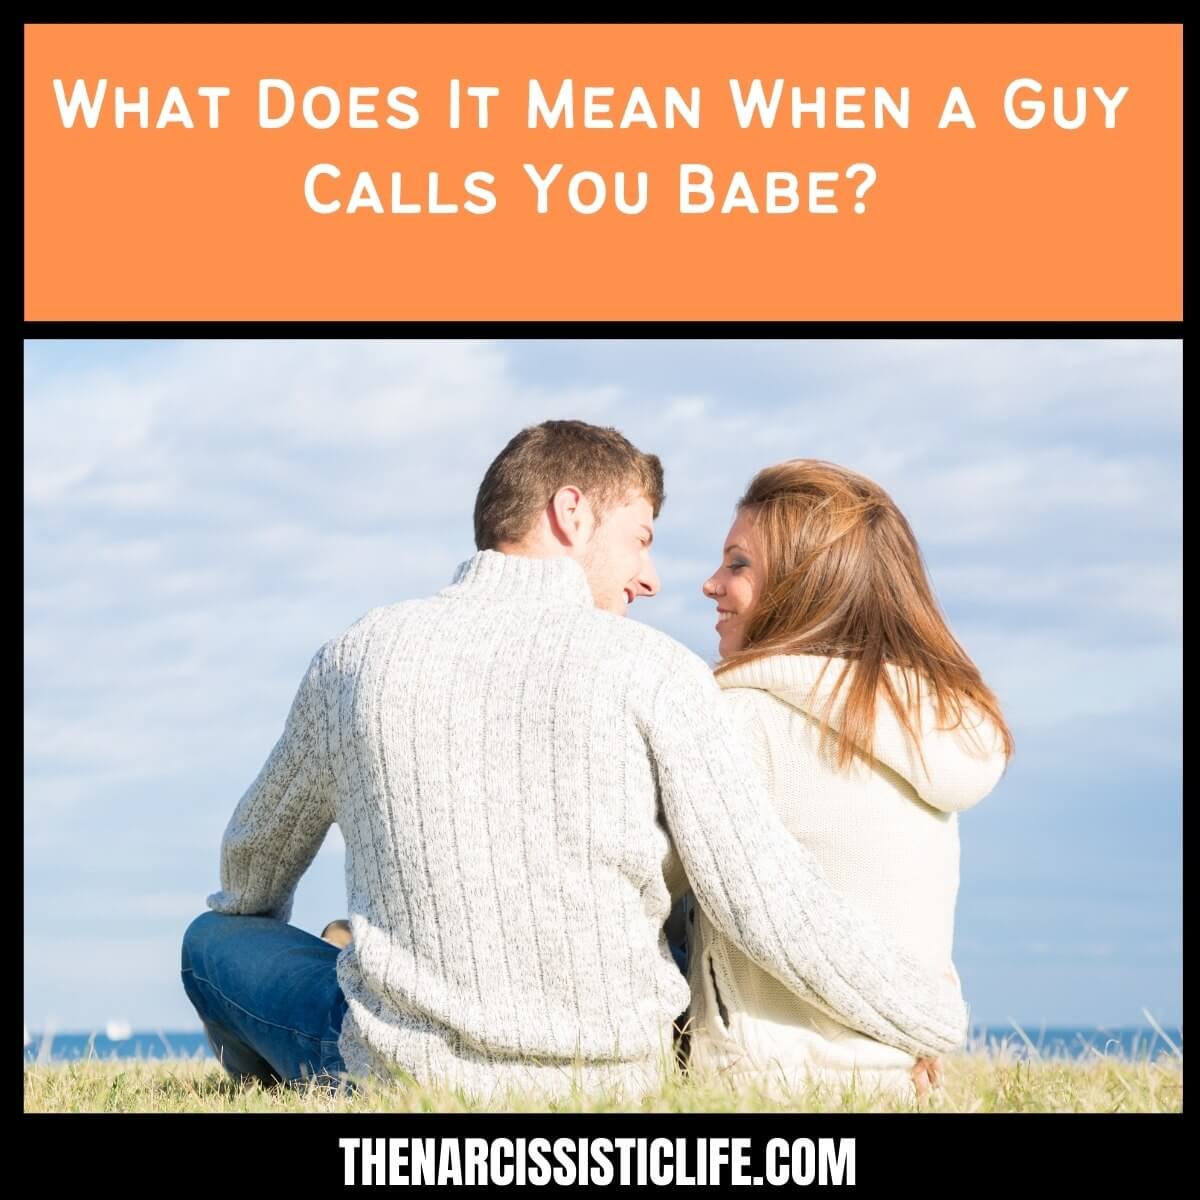 What Does It Mean When a Guy Calls You Babe